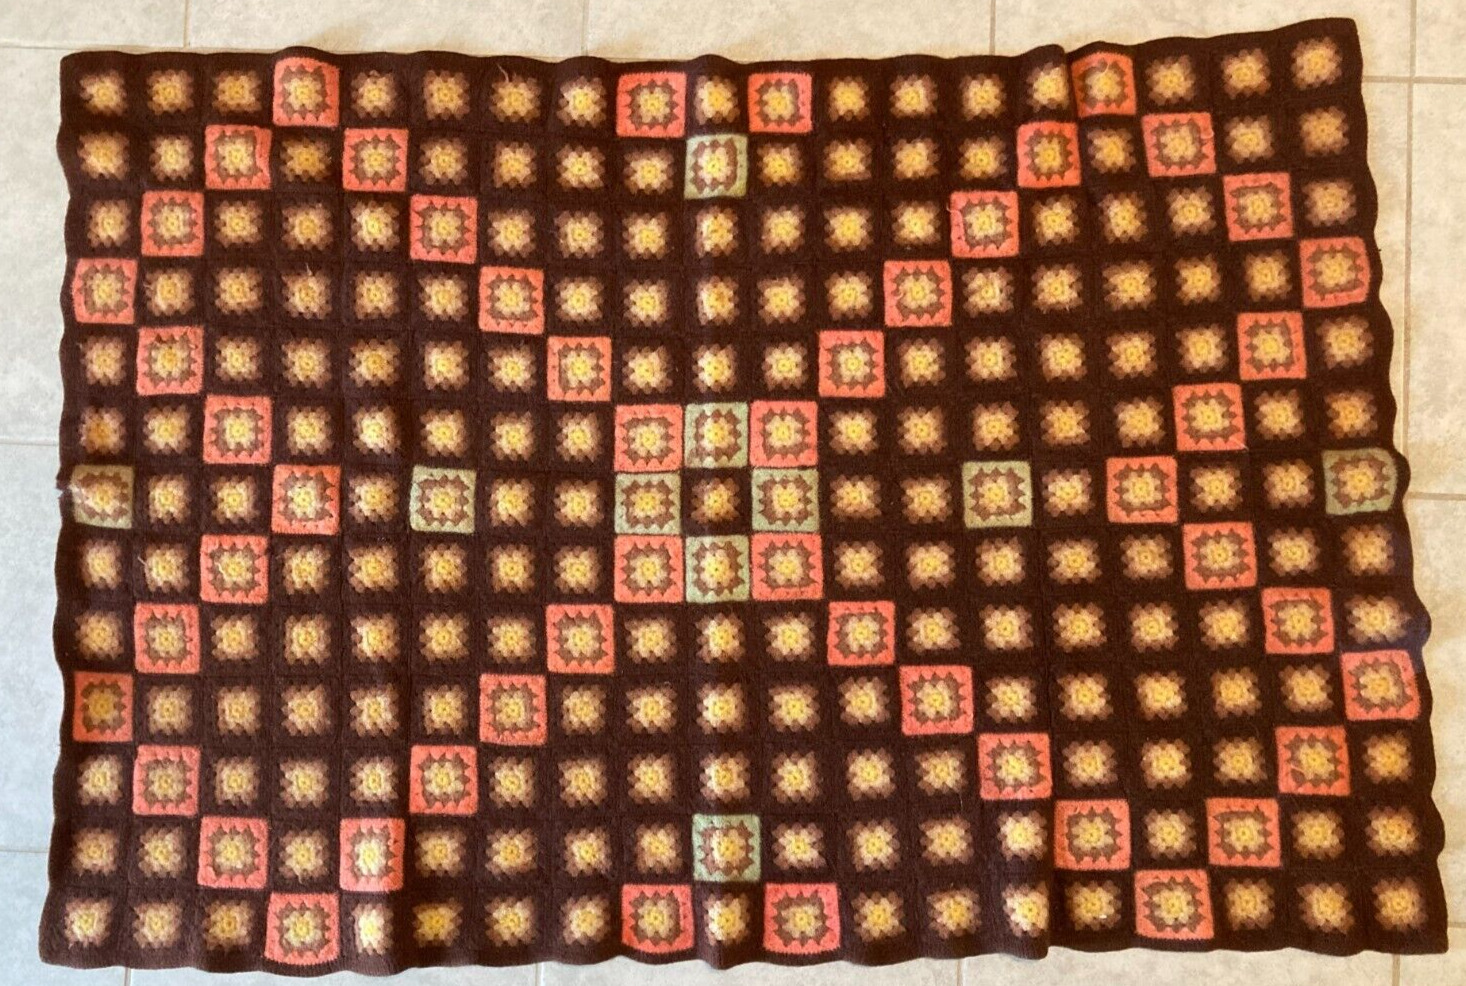 Vintage Quilt Grandmothers Patch Yarn crochet Handmade Cottage Farmhouse Earth